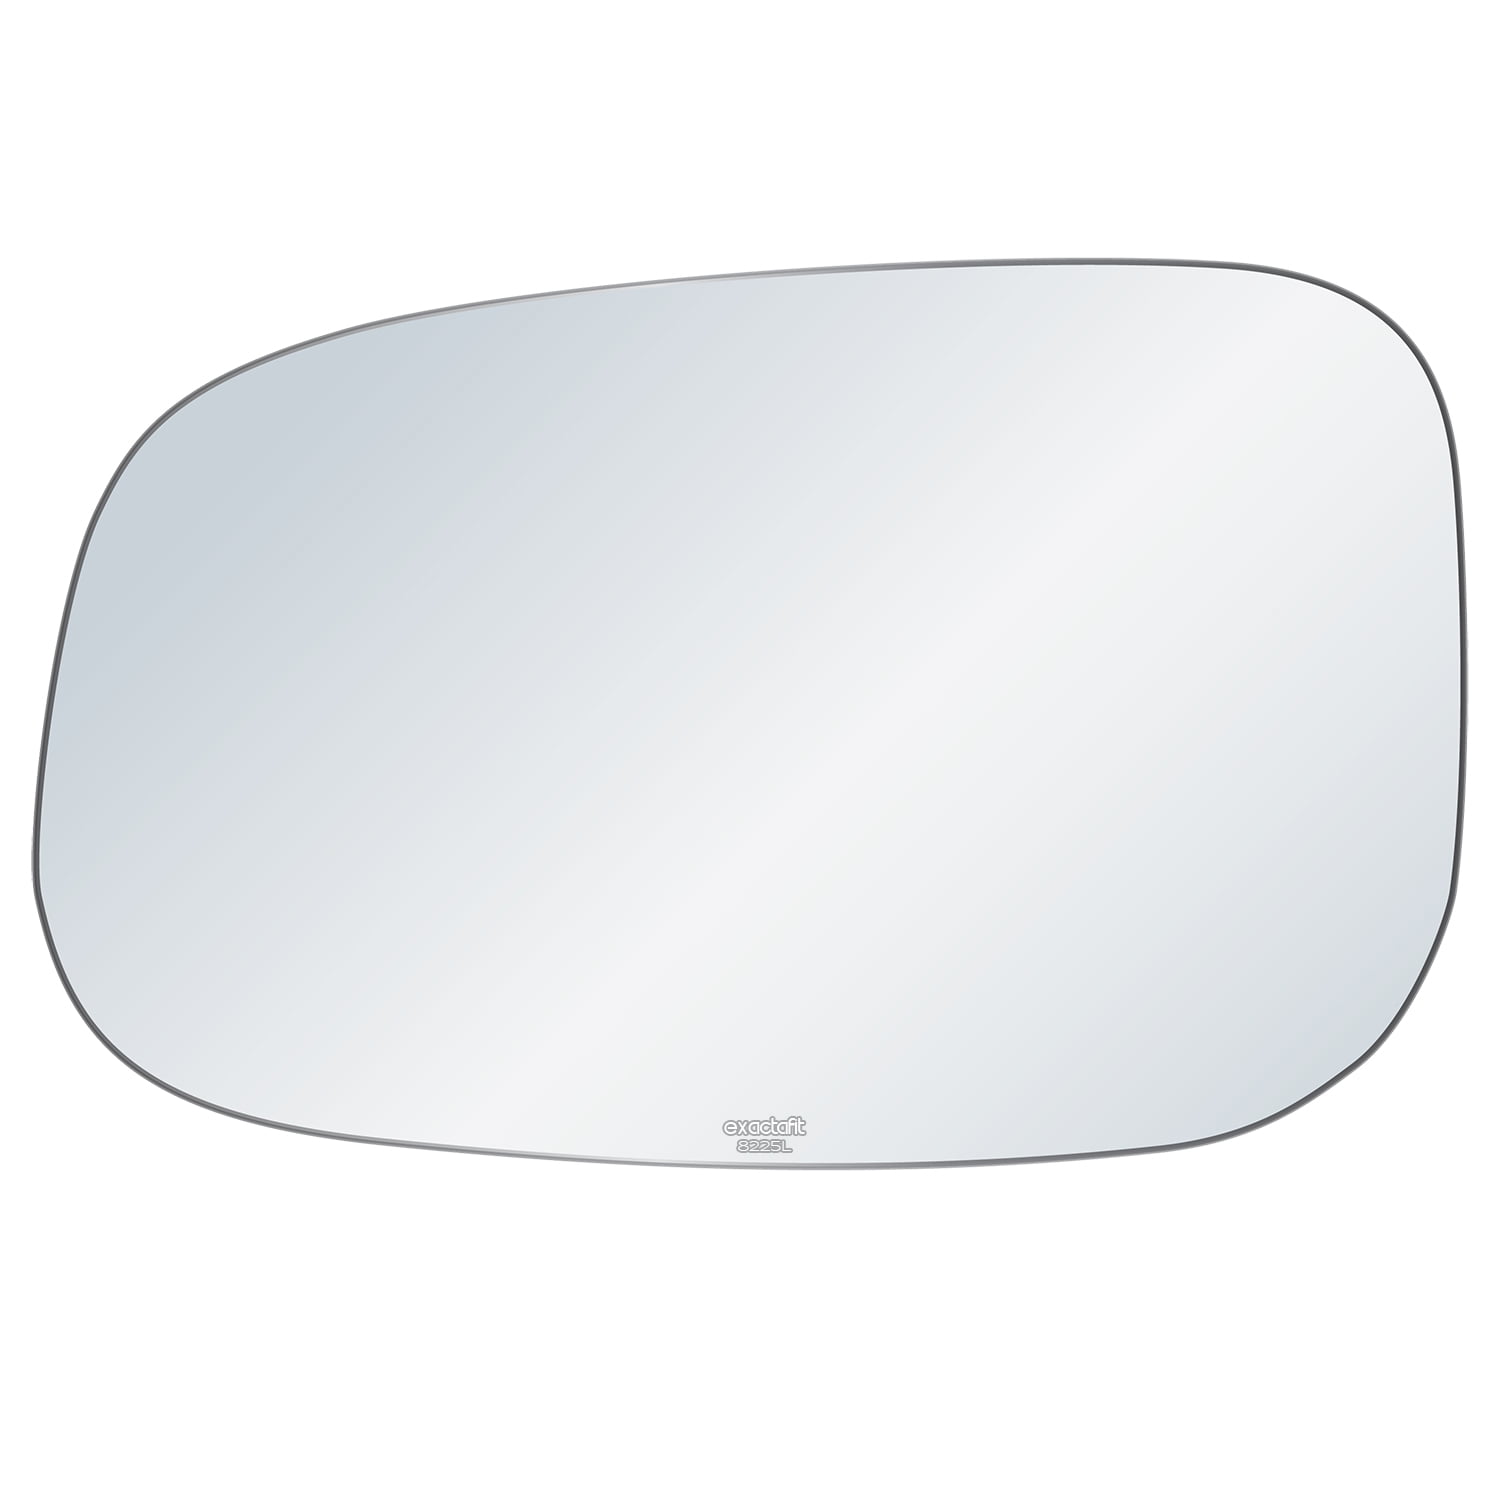 Left hand passenger side for Volvo C30 2010-2013 Wide Angle wing mirror glass